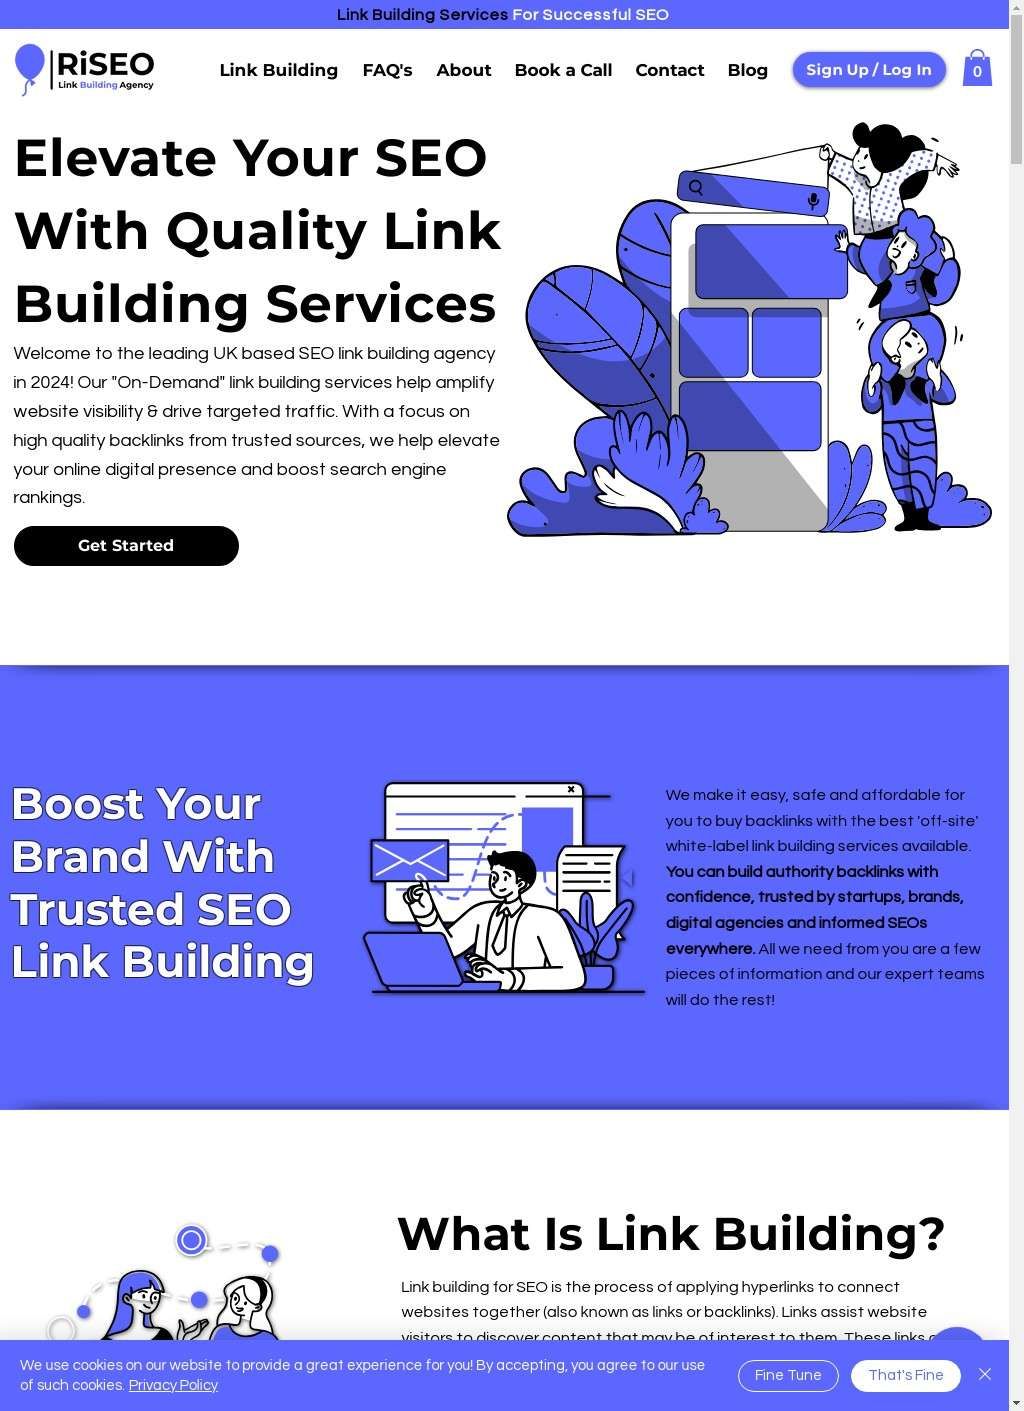 RiSEO Link Building Agency